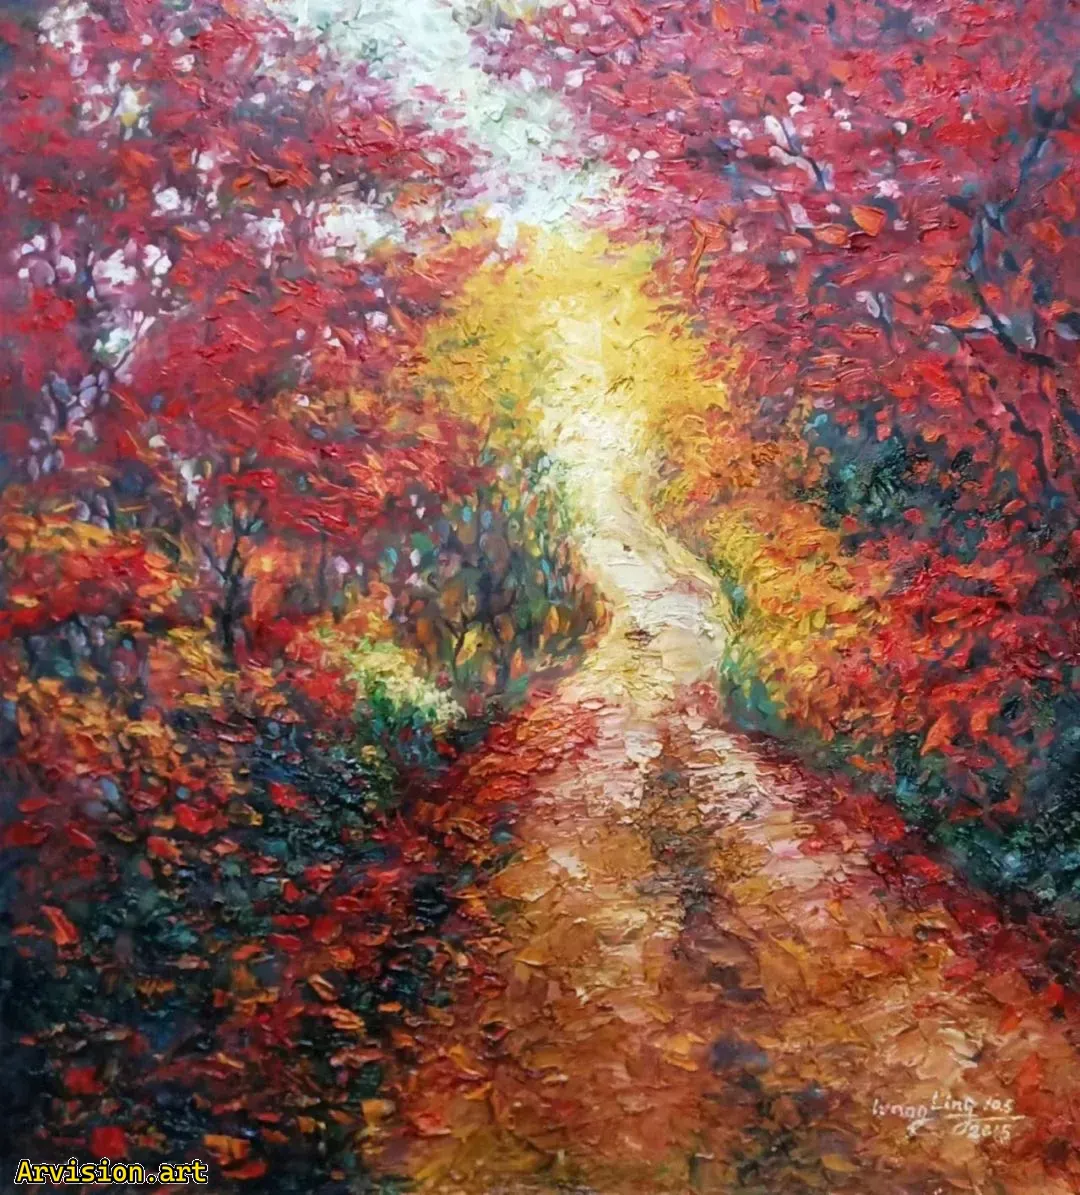 Wang Lin's Oil Painting on the Mud Road in Late Autumn Noon